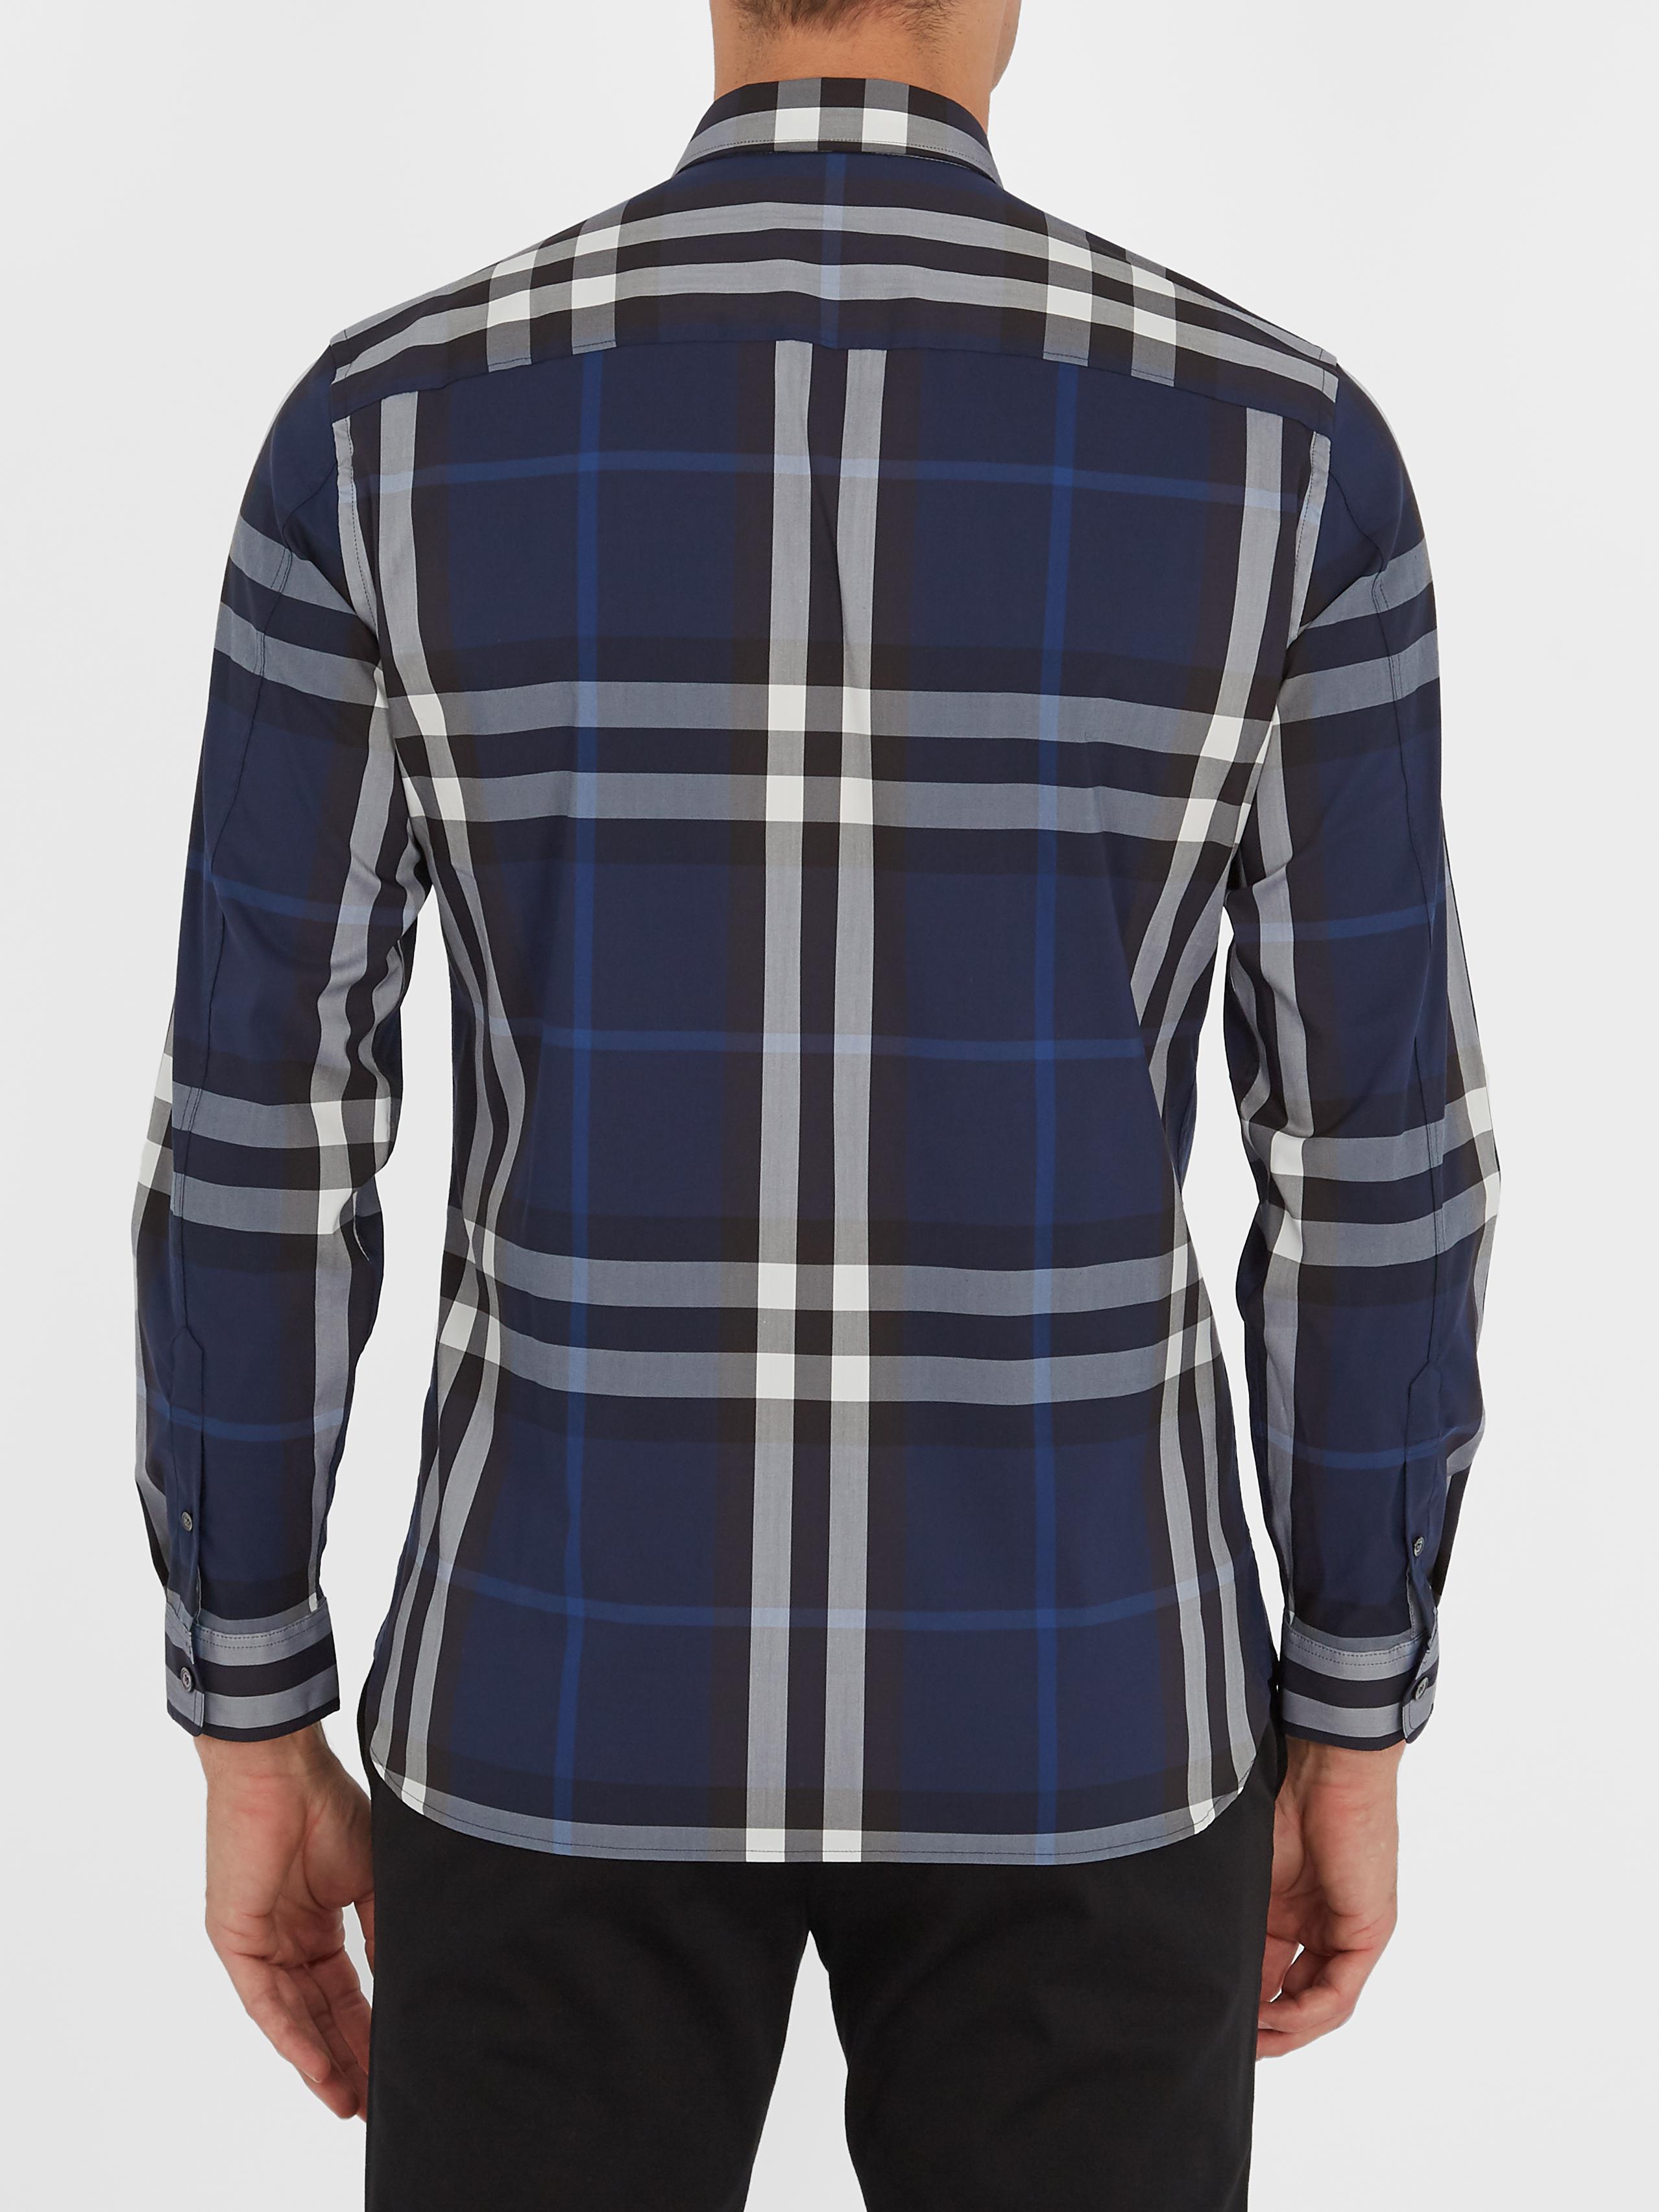 Lyst - Burberry Nelson Stretch Button-down Shirt - Slim Fit in Blue for Men